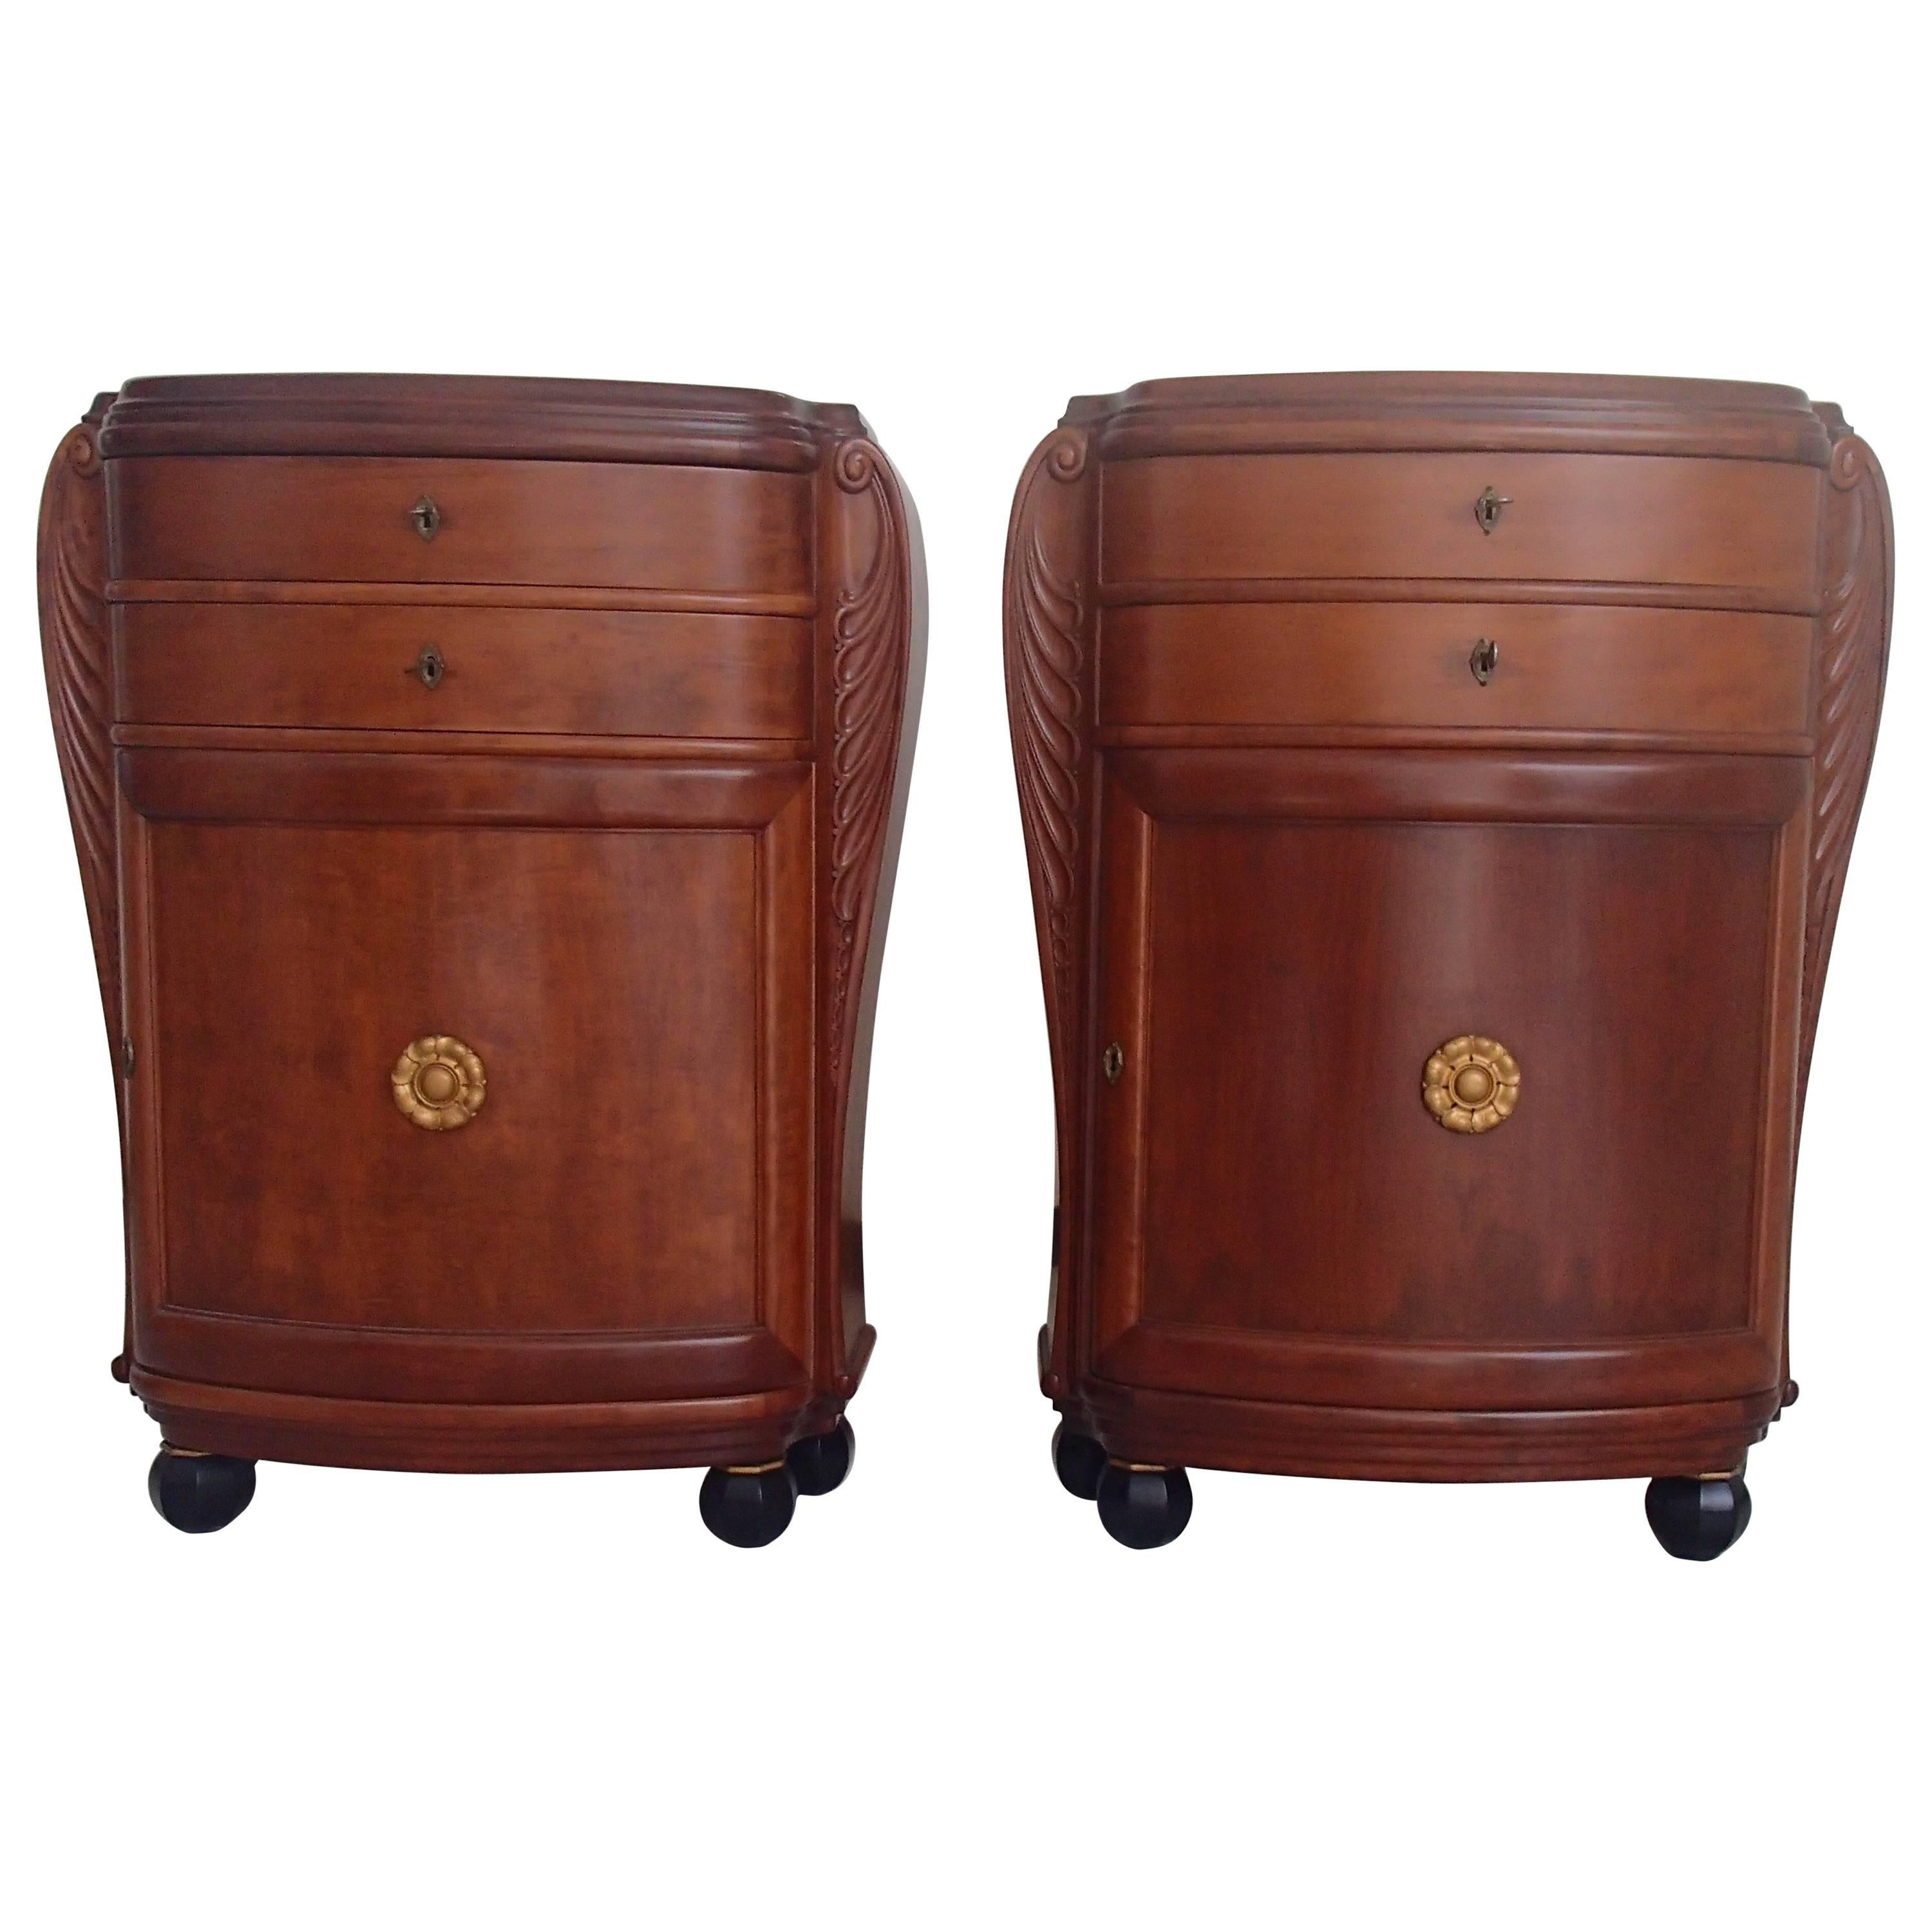 1920 Pair of Cabinets/Consoles/Cupboards Tinted Birch 4 Ball Legs Floral Emblem For Sale